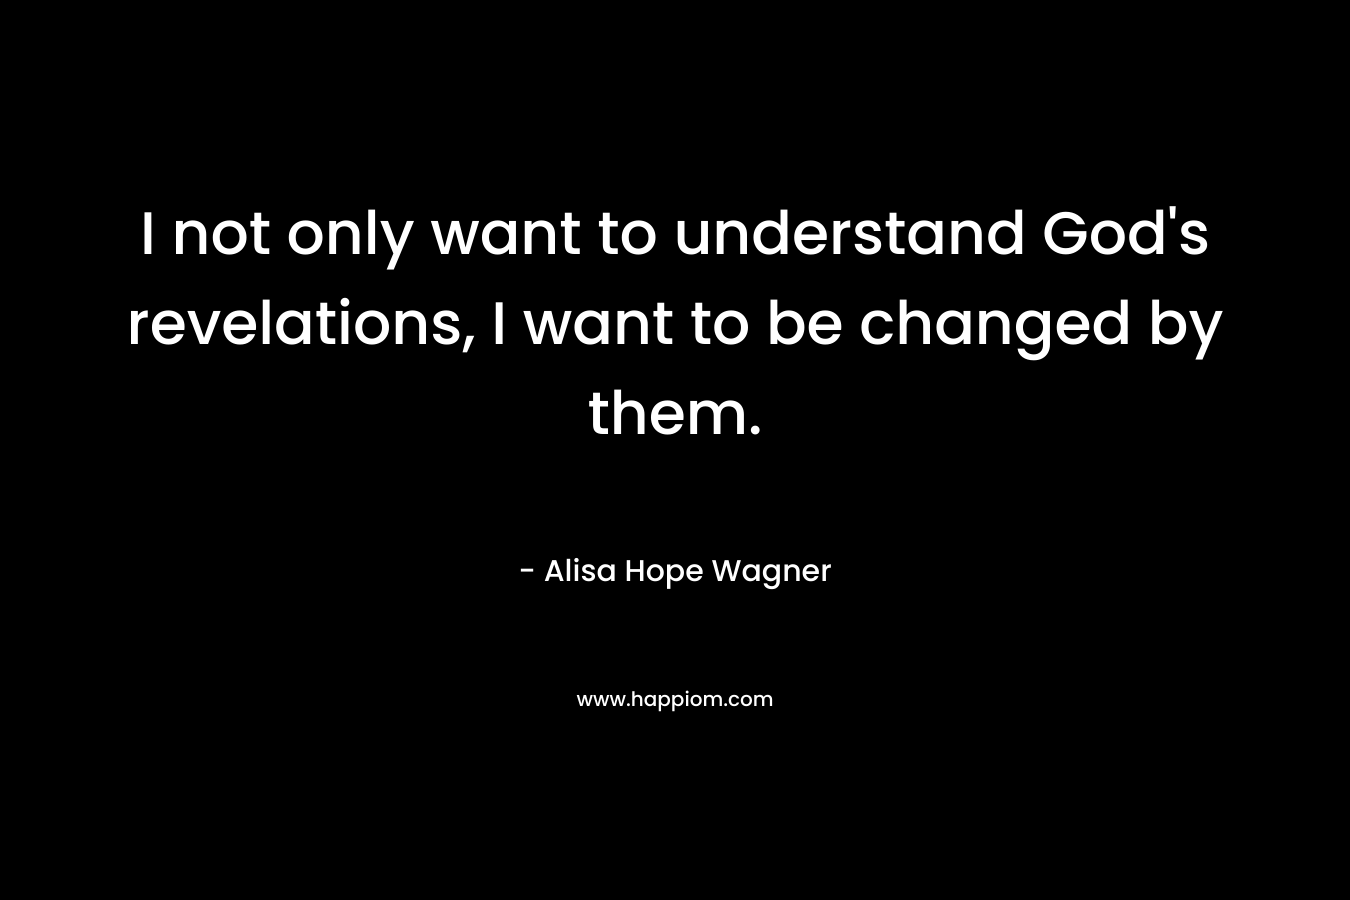 I not only want to understand God’s revelations, I want to be changed by them. – Alisa Hope Wagner